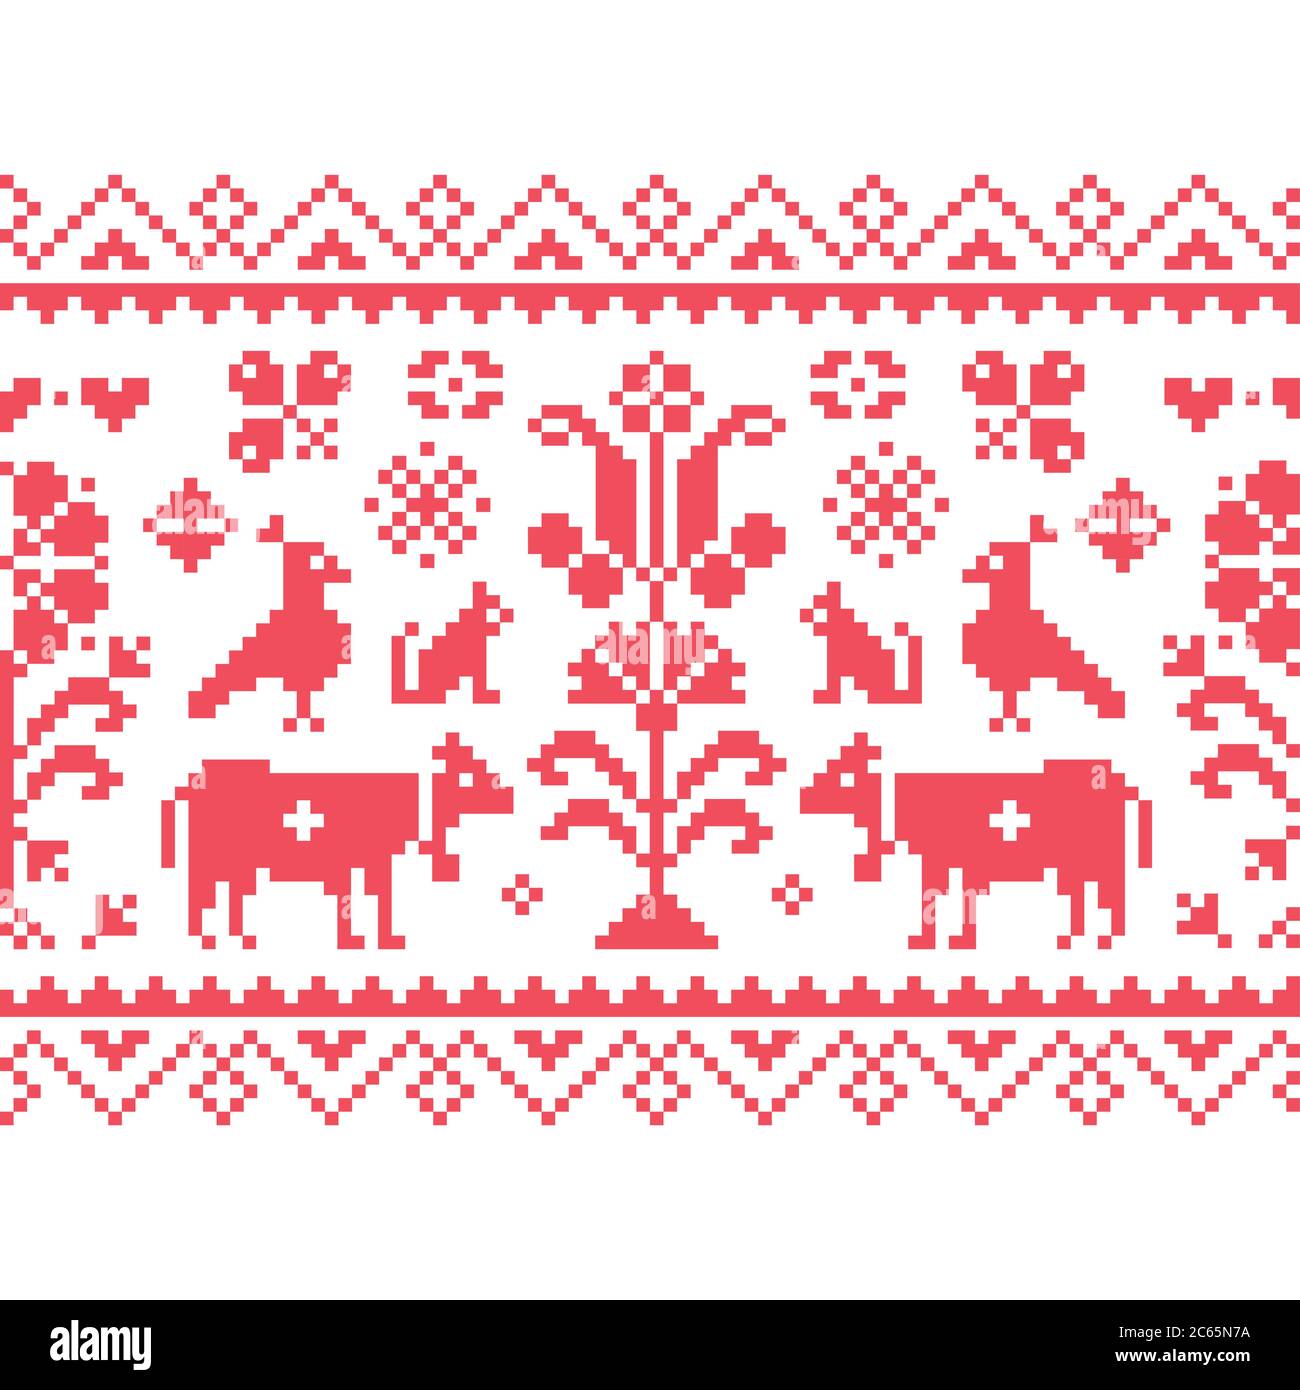 Cross stitch vector seamless folk art pattern - repetitive background inspired by German and Austrian traditional cross stitich designs Stock Vector